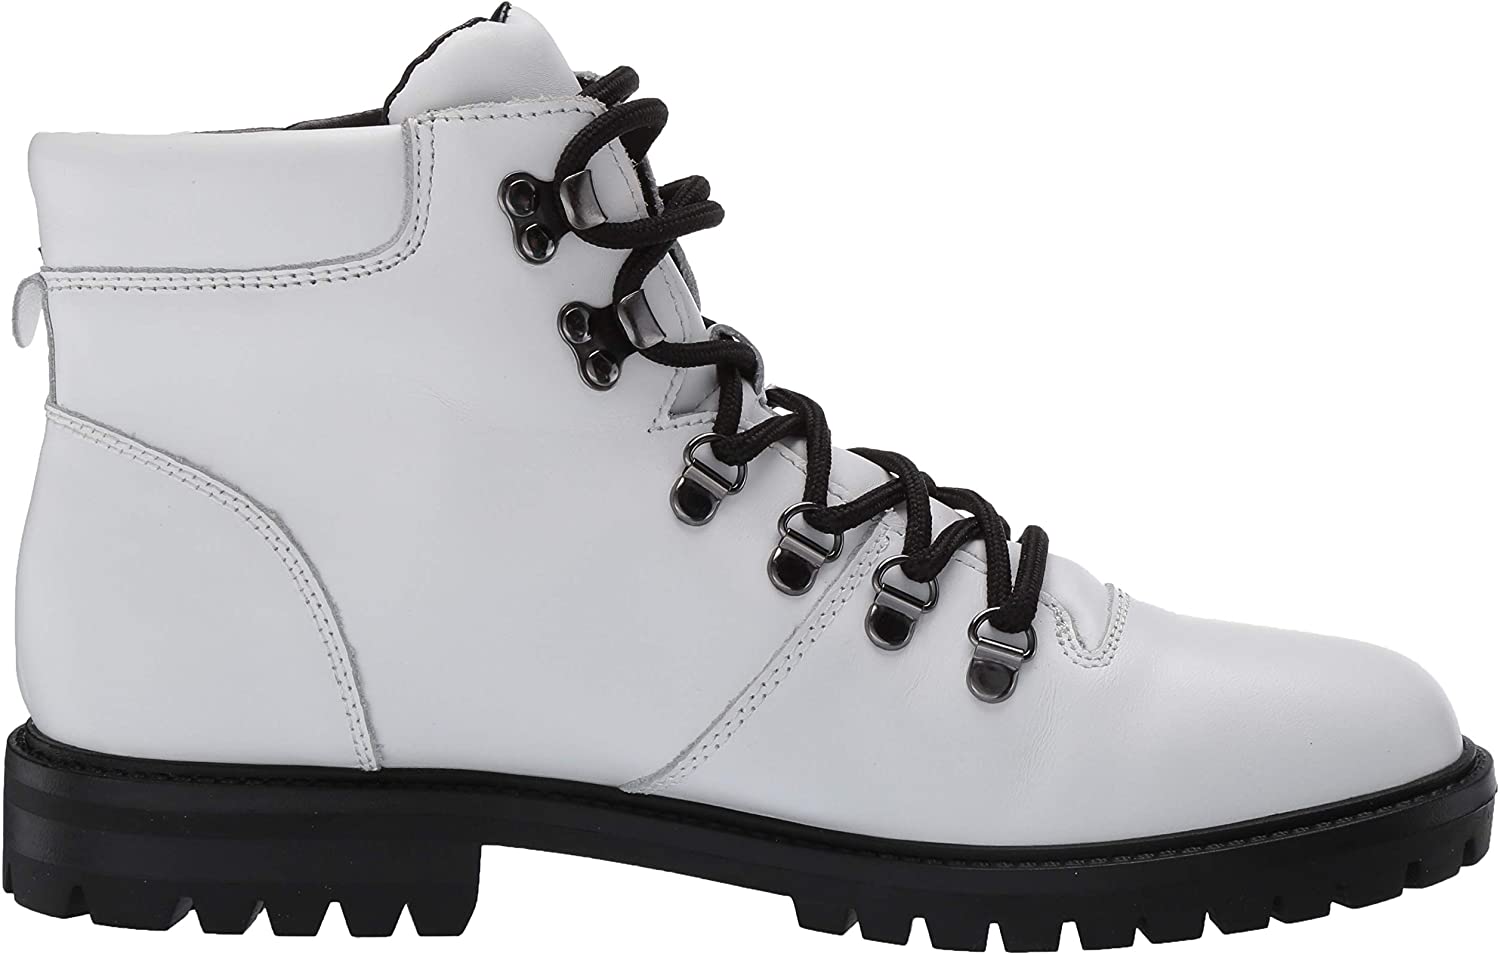 Marc Fisher Womens Boots in White Color, Size 10 NTH 886063405873 | eBay